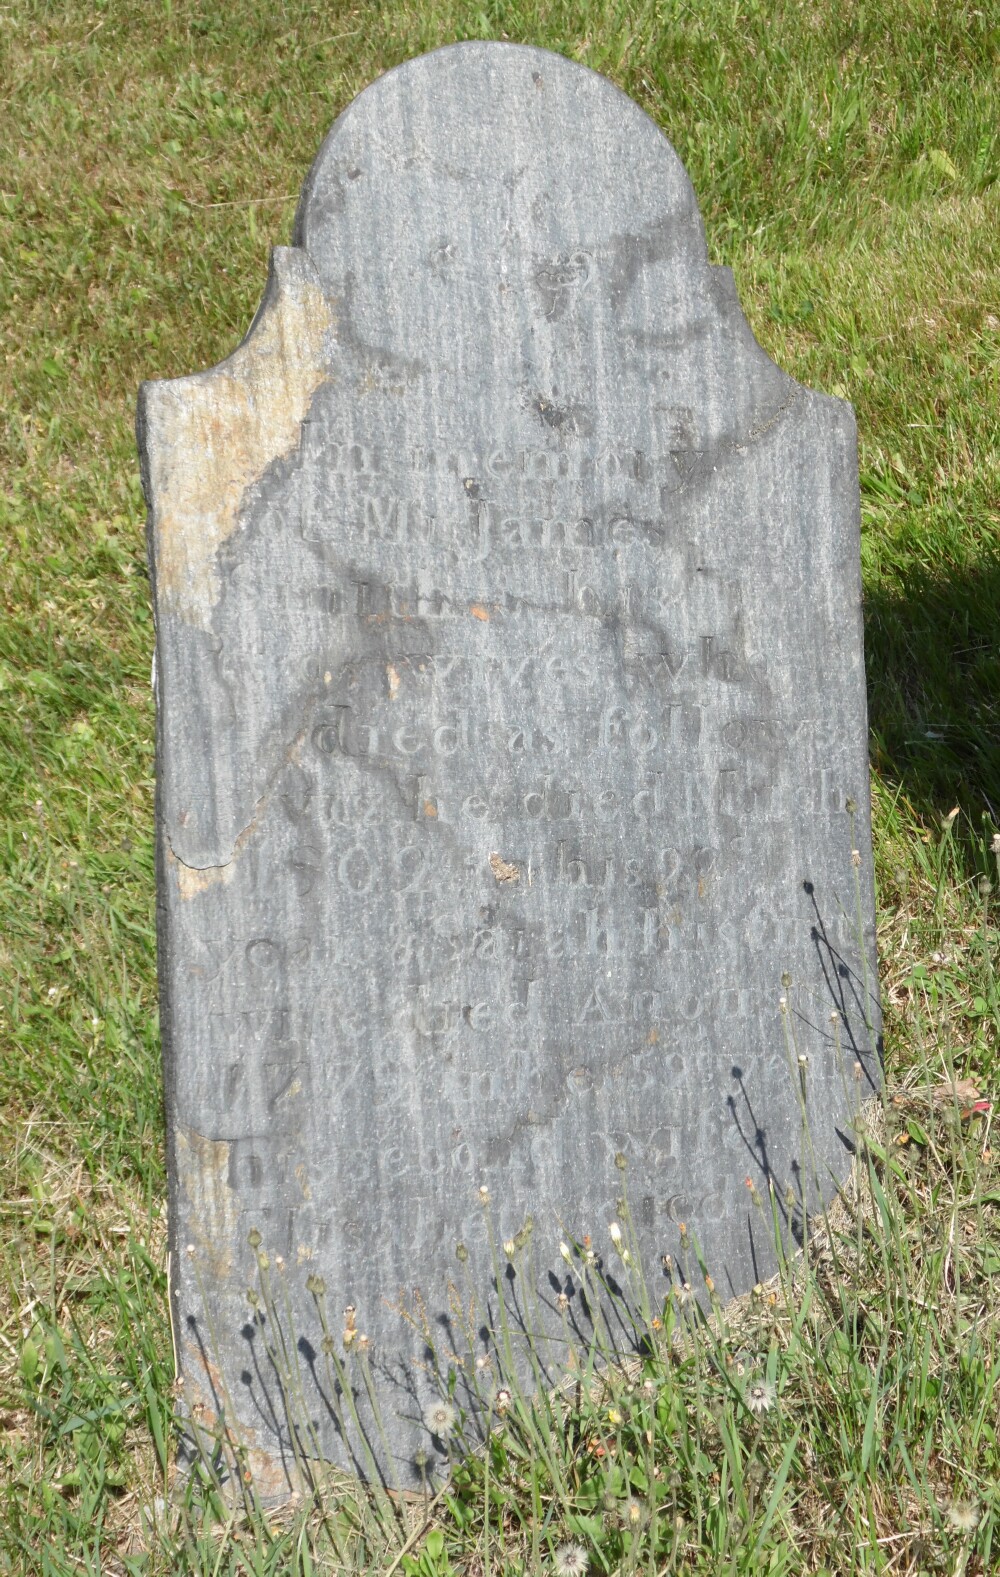 Gravestone of James Smith and his wives Sarah and Elizabeth